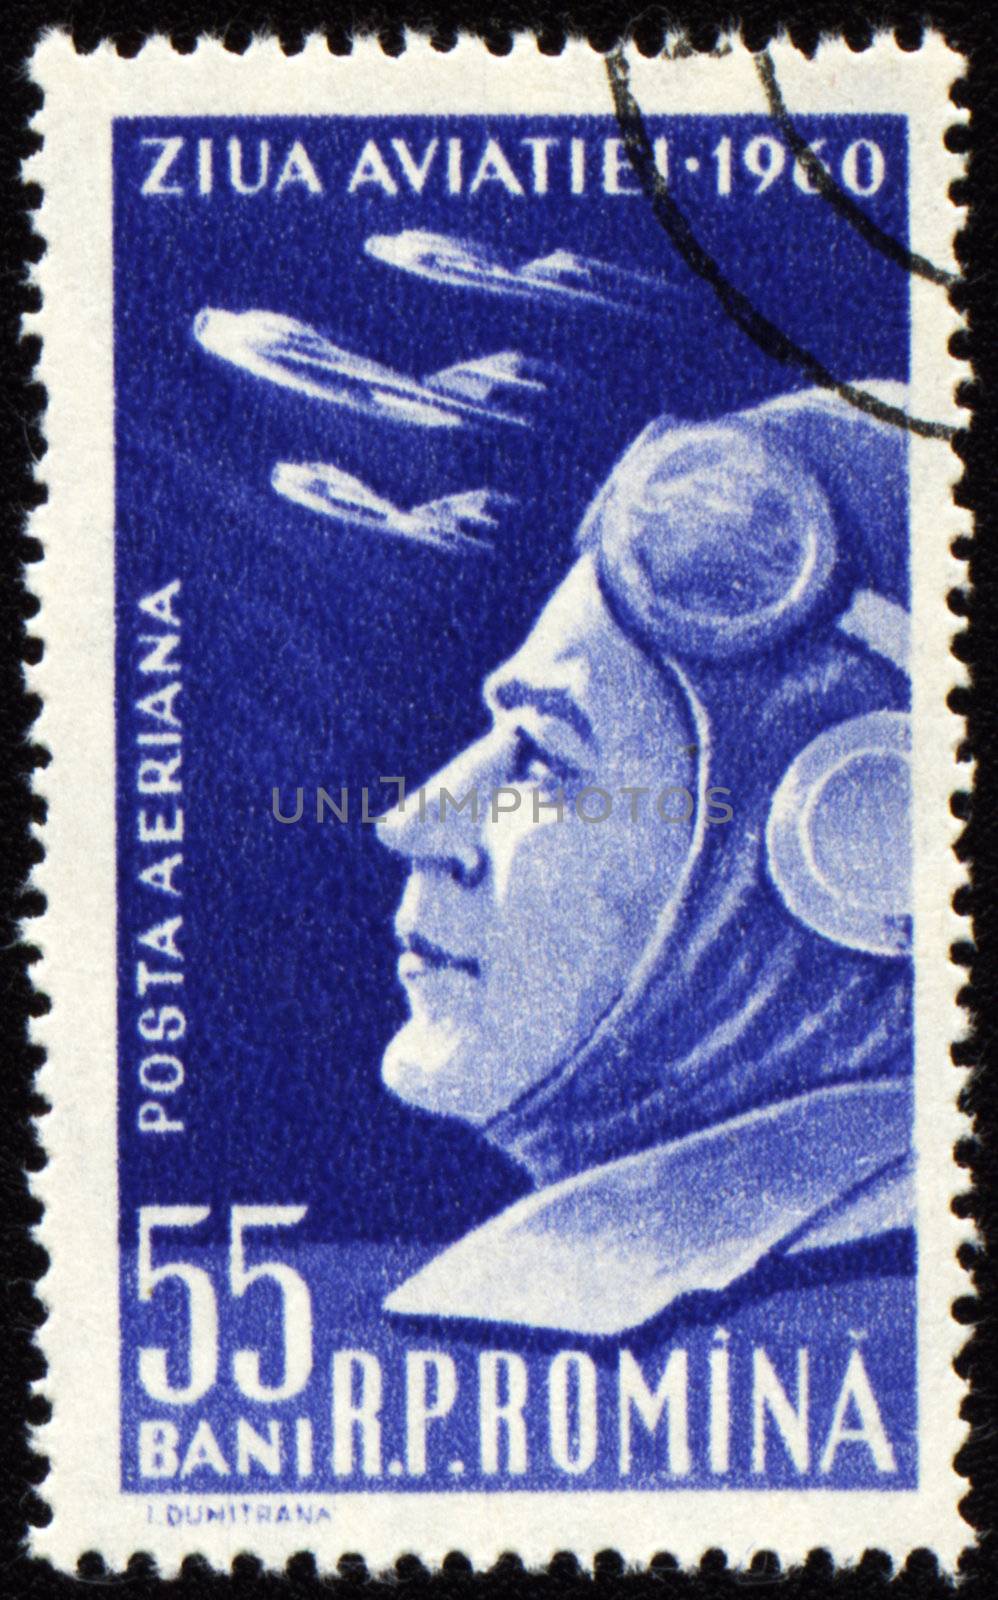 ROMANIA - CIRCA 1960: A stamp printed in Romania shows military flyer and flying planes on Aviation Day, circa 1960